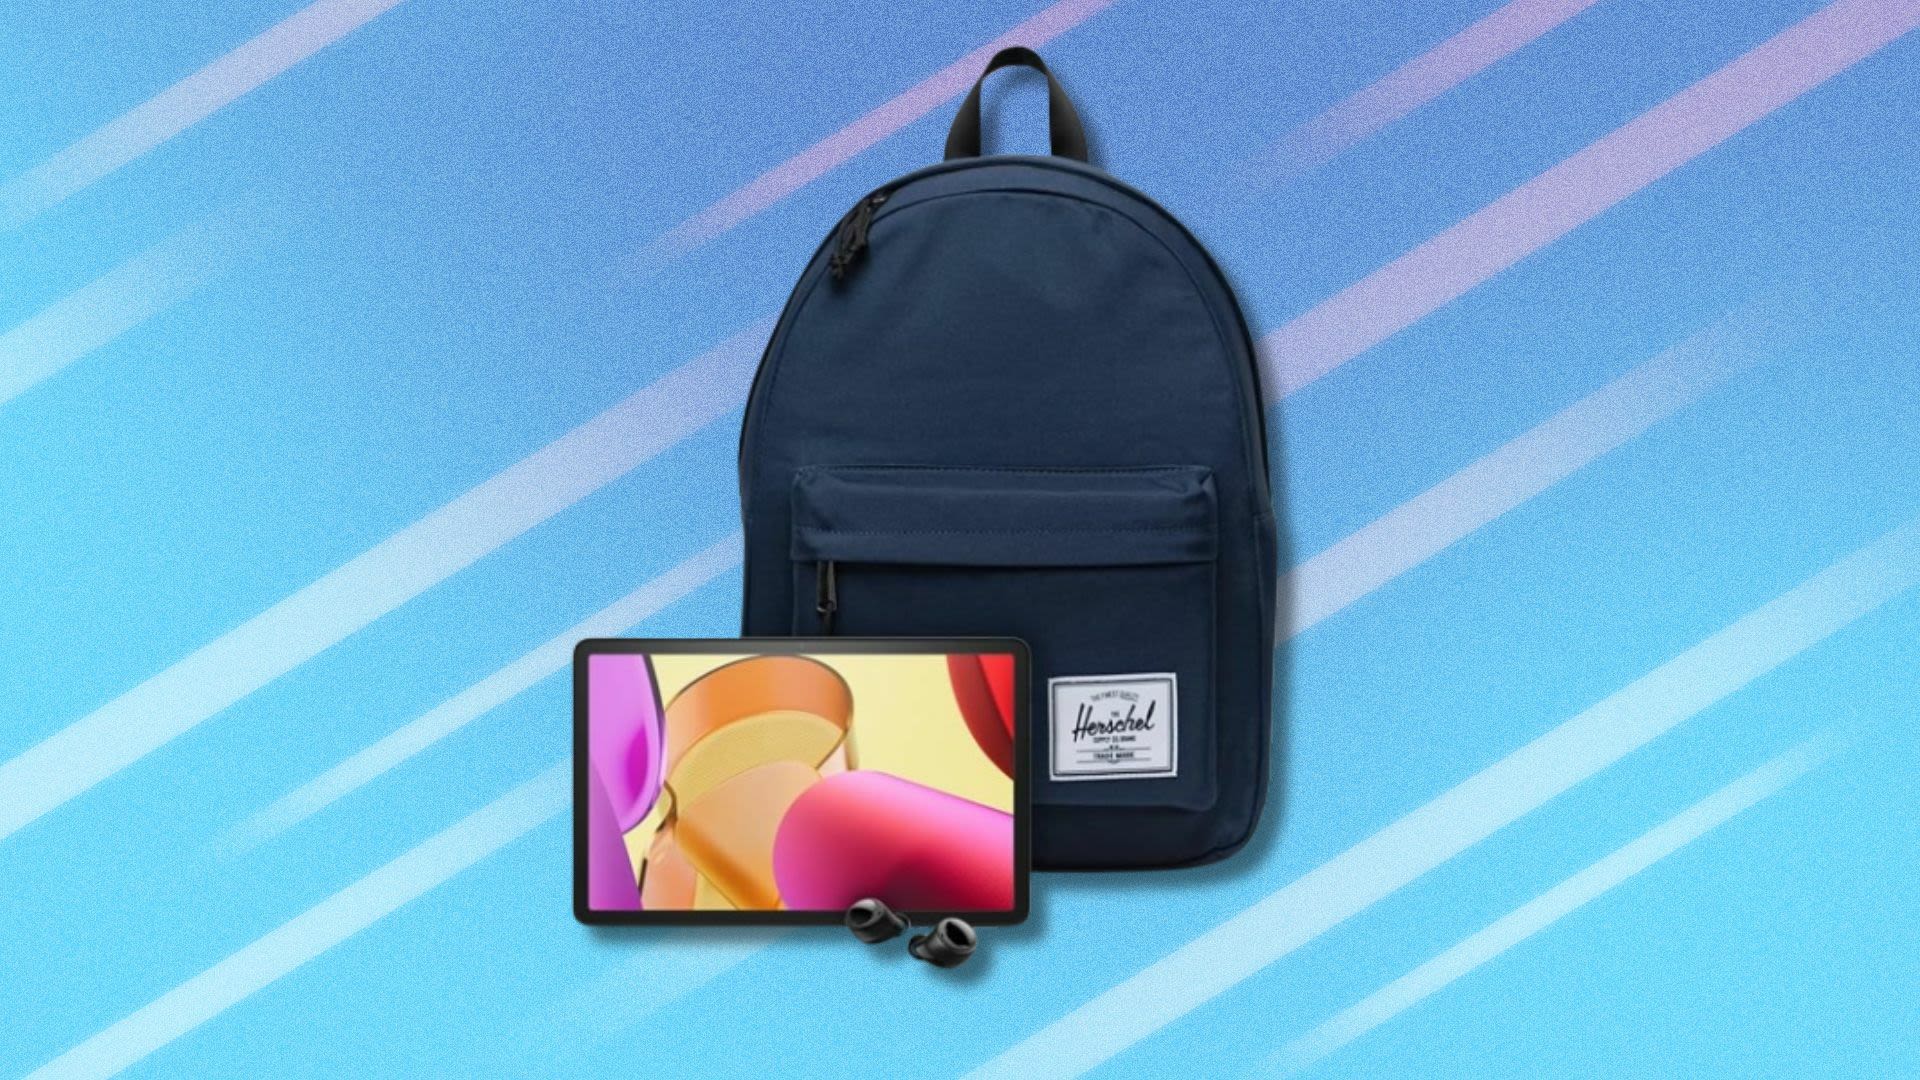 Save 43% on the ultimate back-to-school-bundle with the Amazon Fire Max 11 tablet, a Herschel backpack, and the Echo Buds